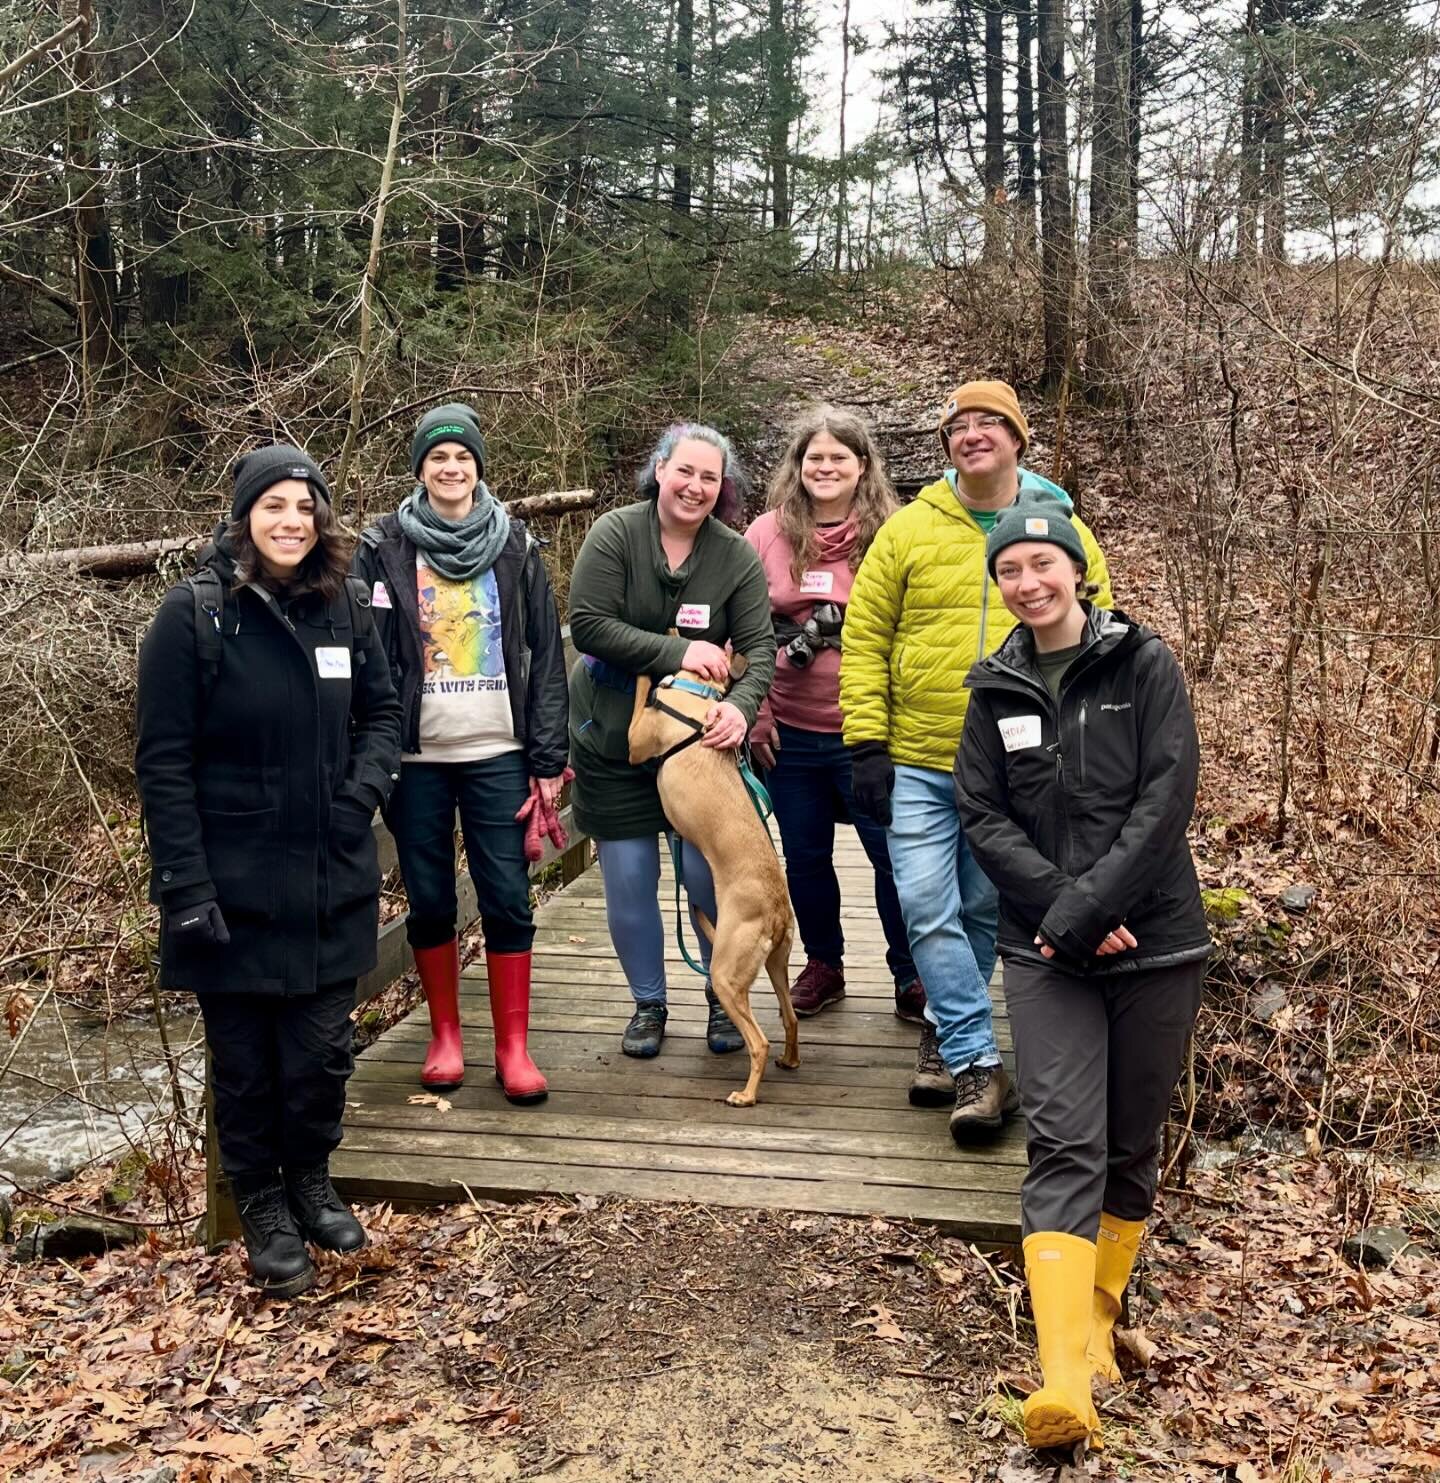 Our Trail Mixer with @brunswicktopsham last Sunday turned into an impromptu plant ID walk, as our small group ventured out during the end of a weekend storm to connect with nature in all of its muddiness.

Can you identify any of the plants / fungi w